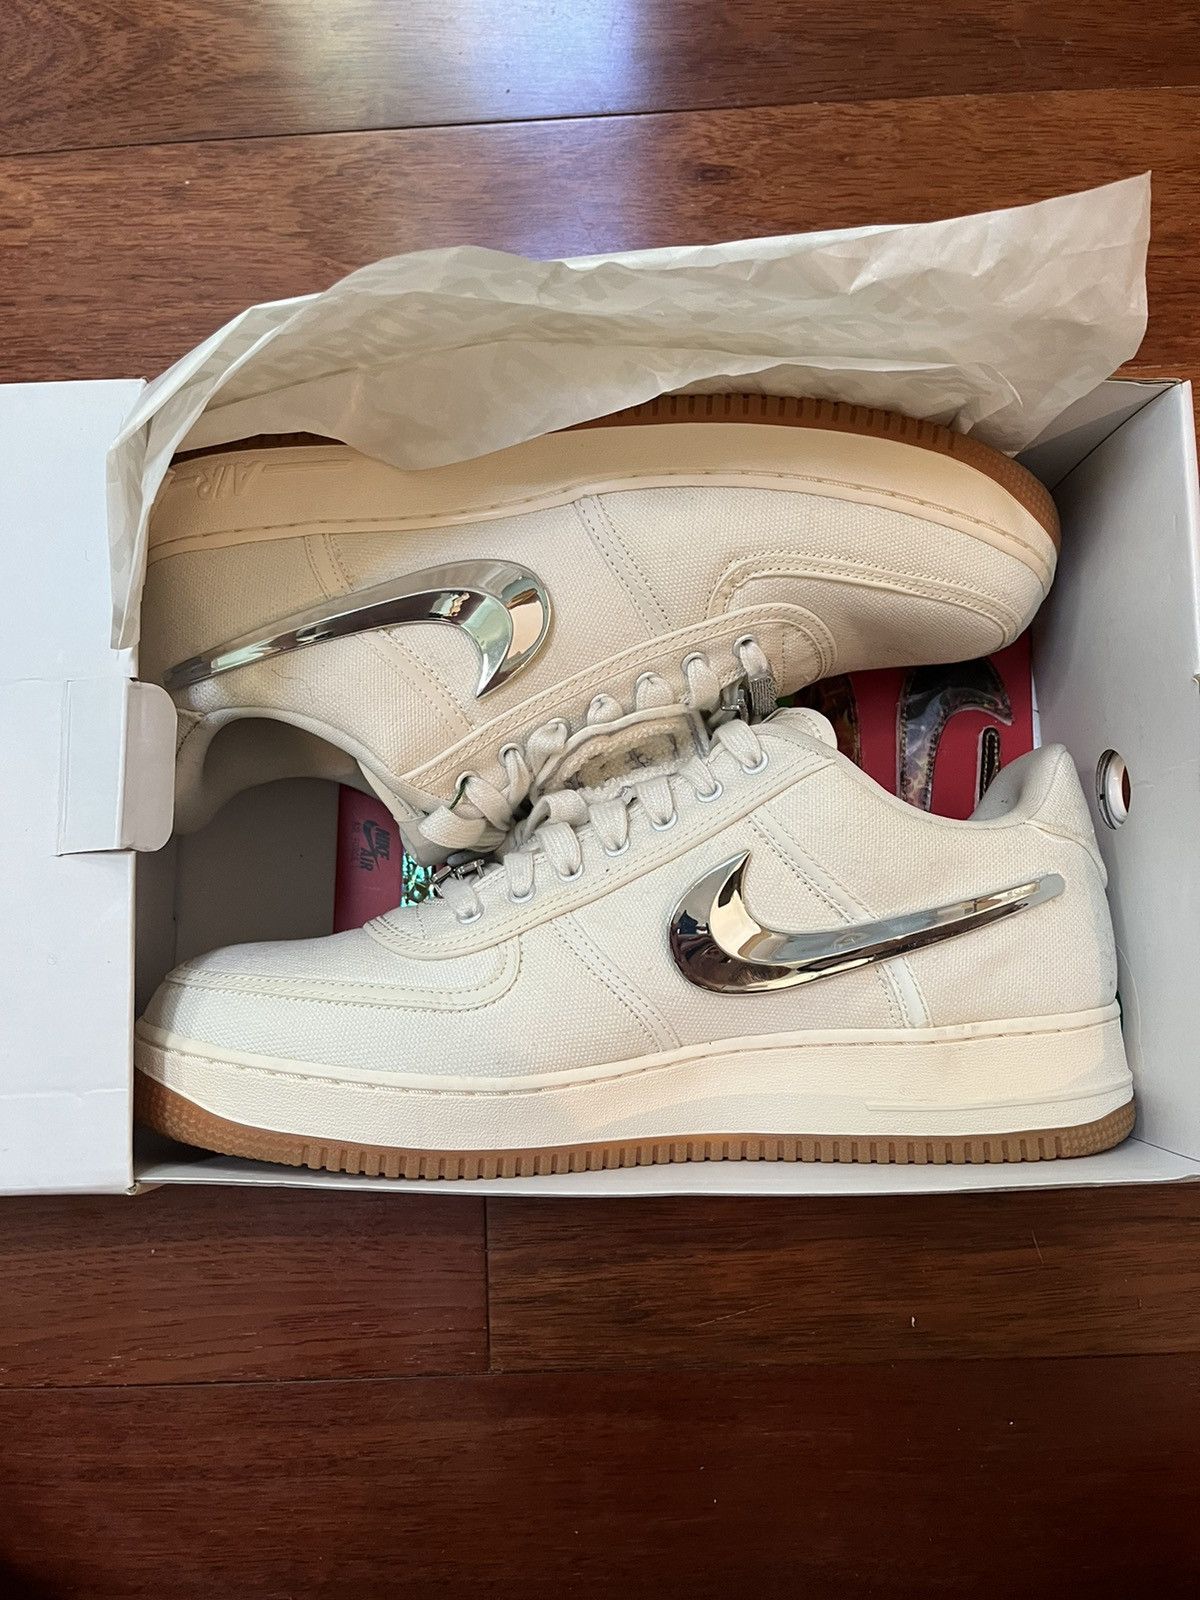 Pre-owned Nike X Travis Scott Air Force 1 “sail” Shoes In White